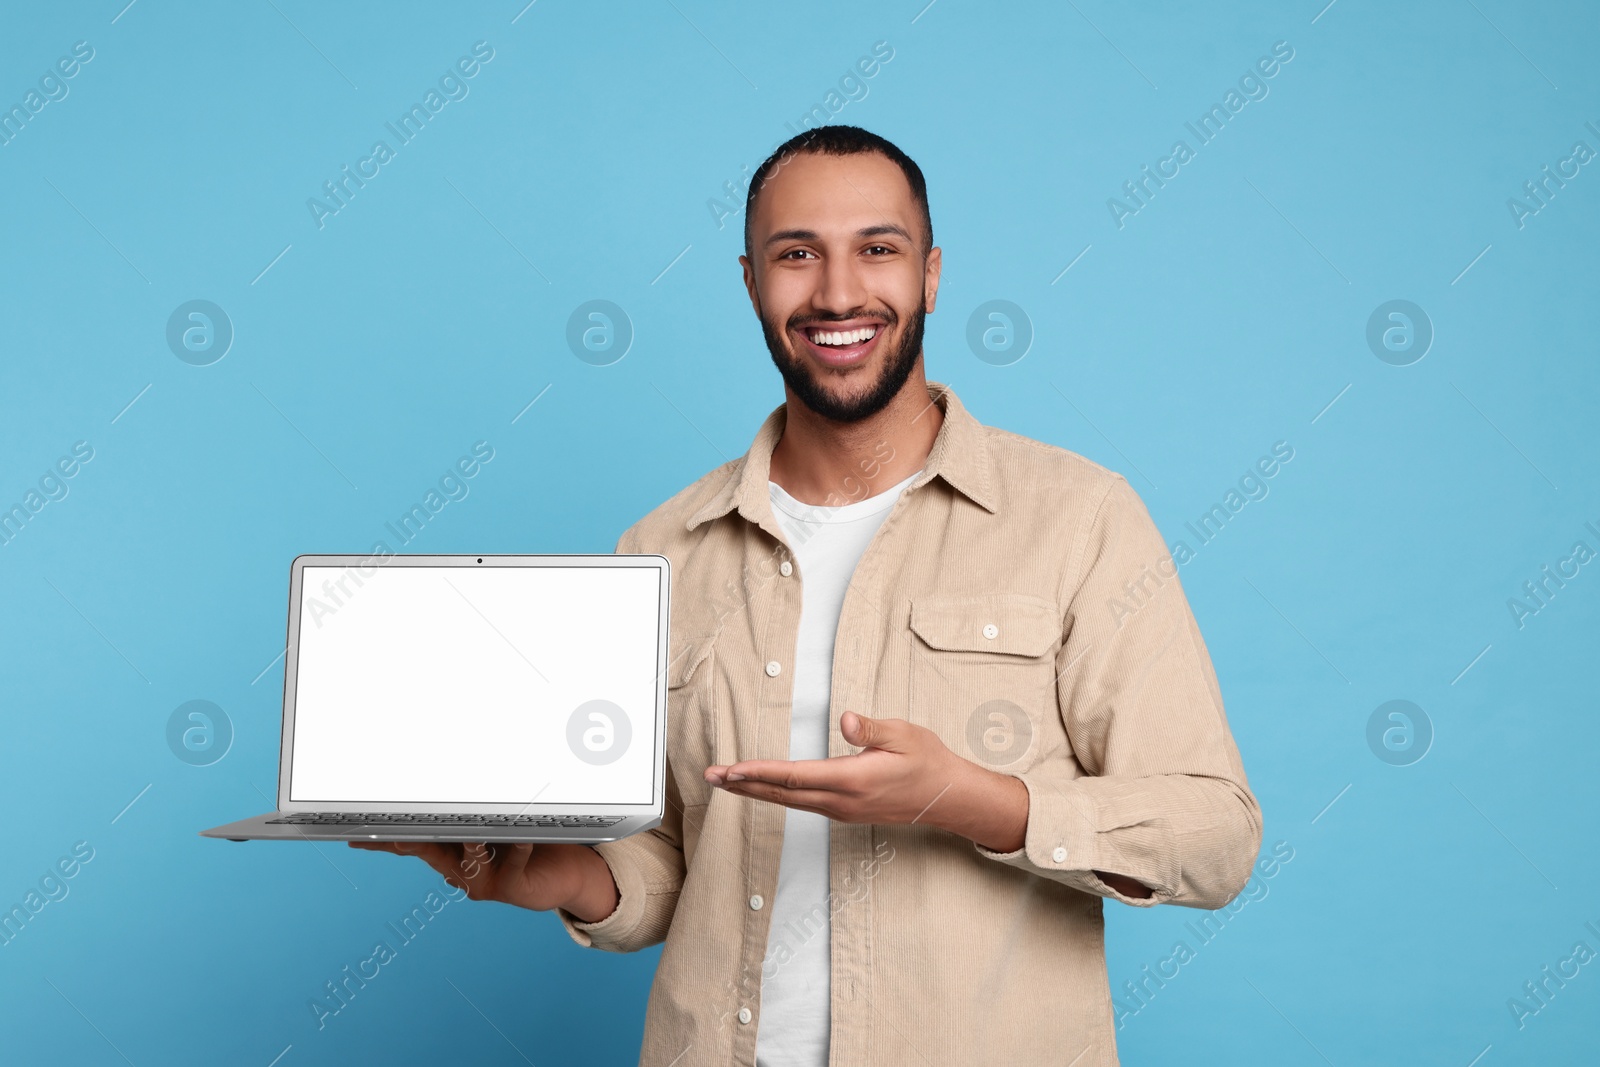 Photo of Smiling young man showing laptop on light blue background